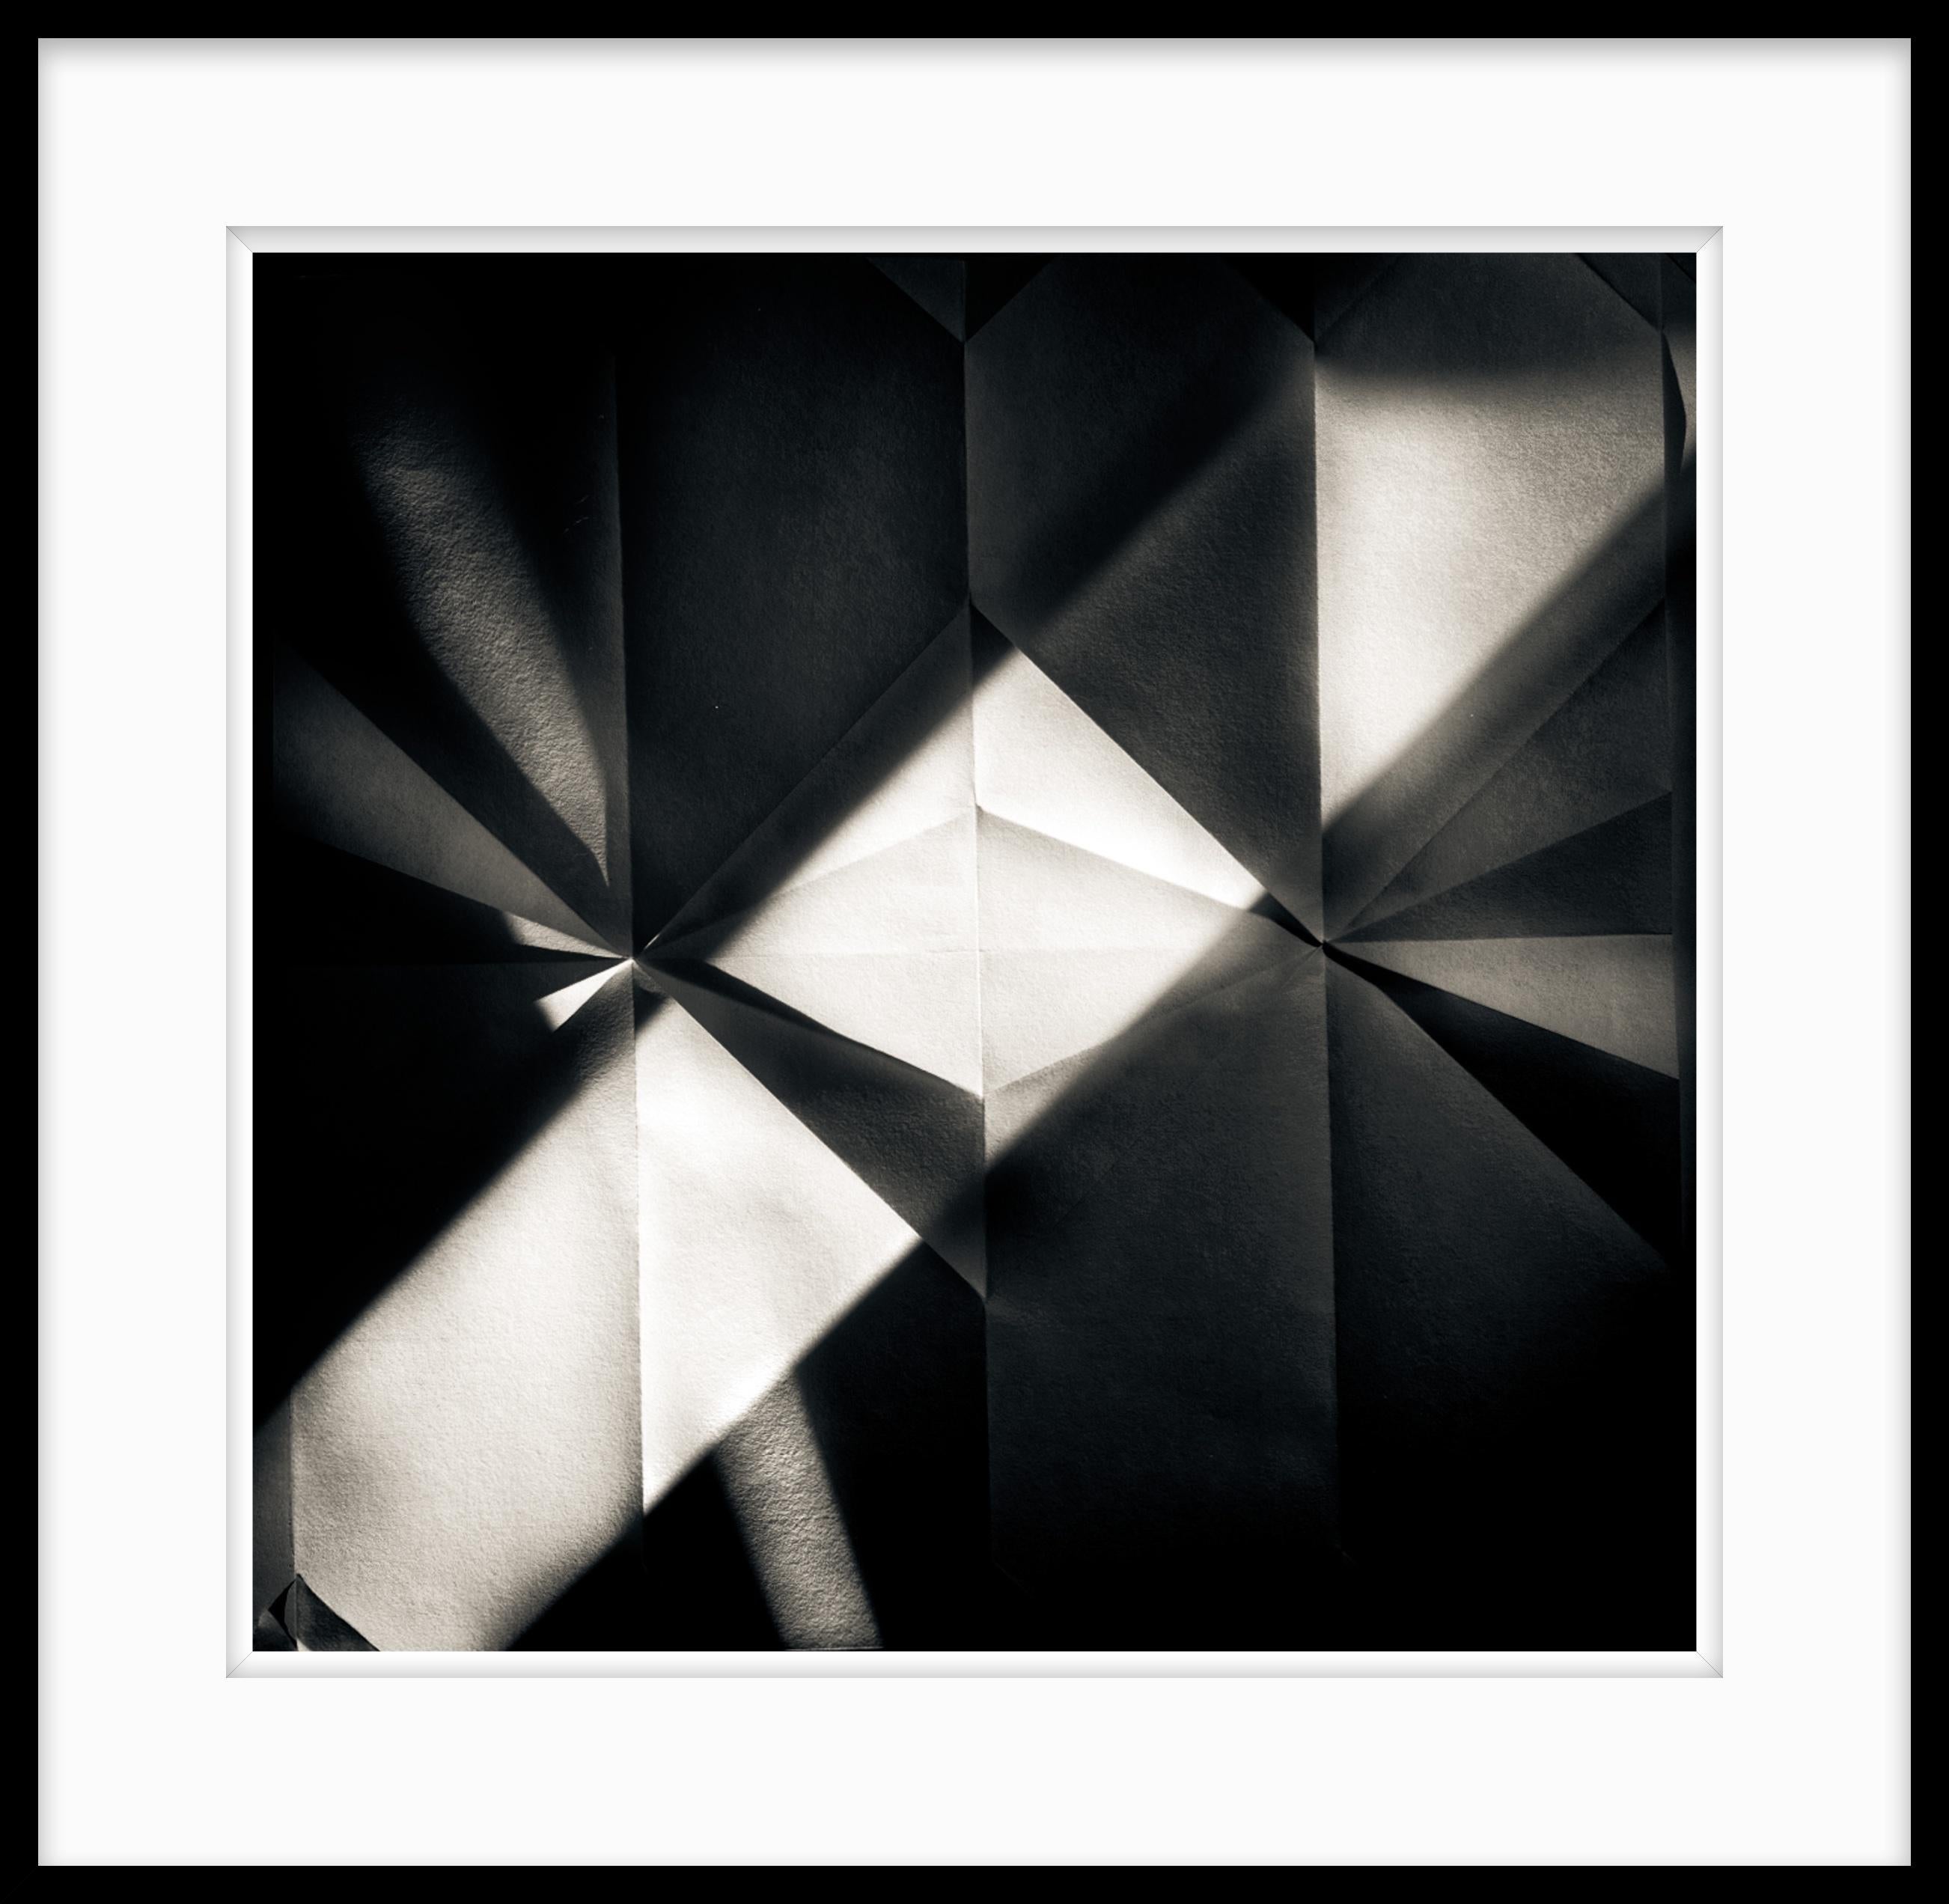  Abstract Photography Black and White - Origami Folds #41 For Sale 1